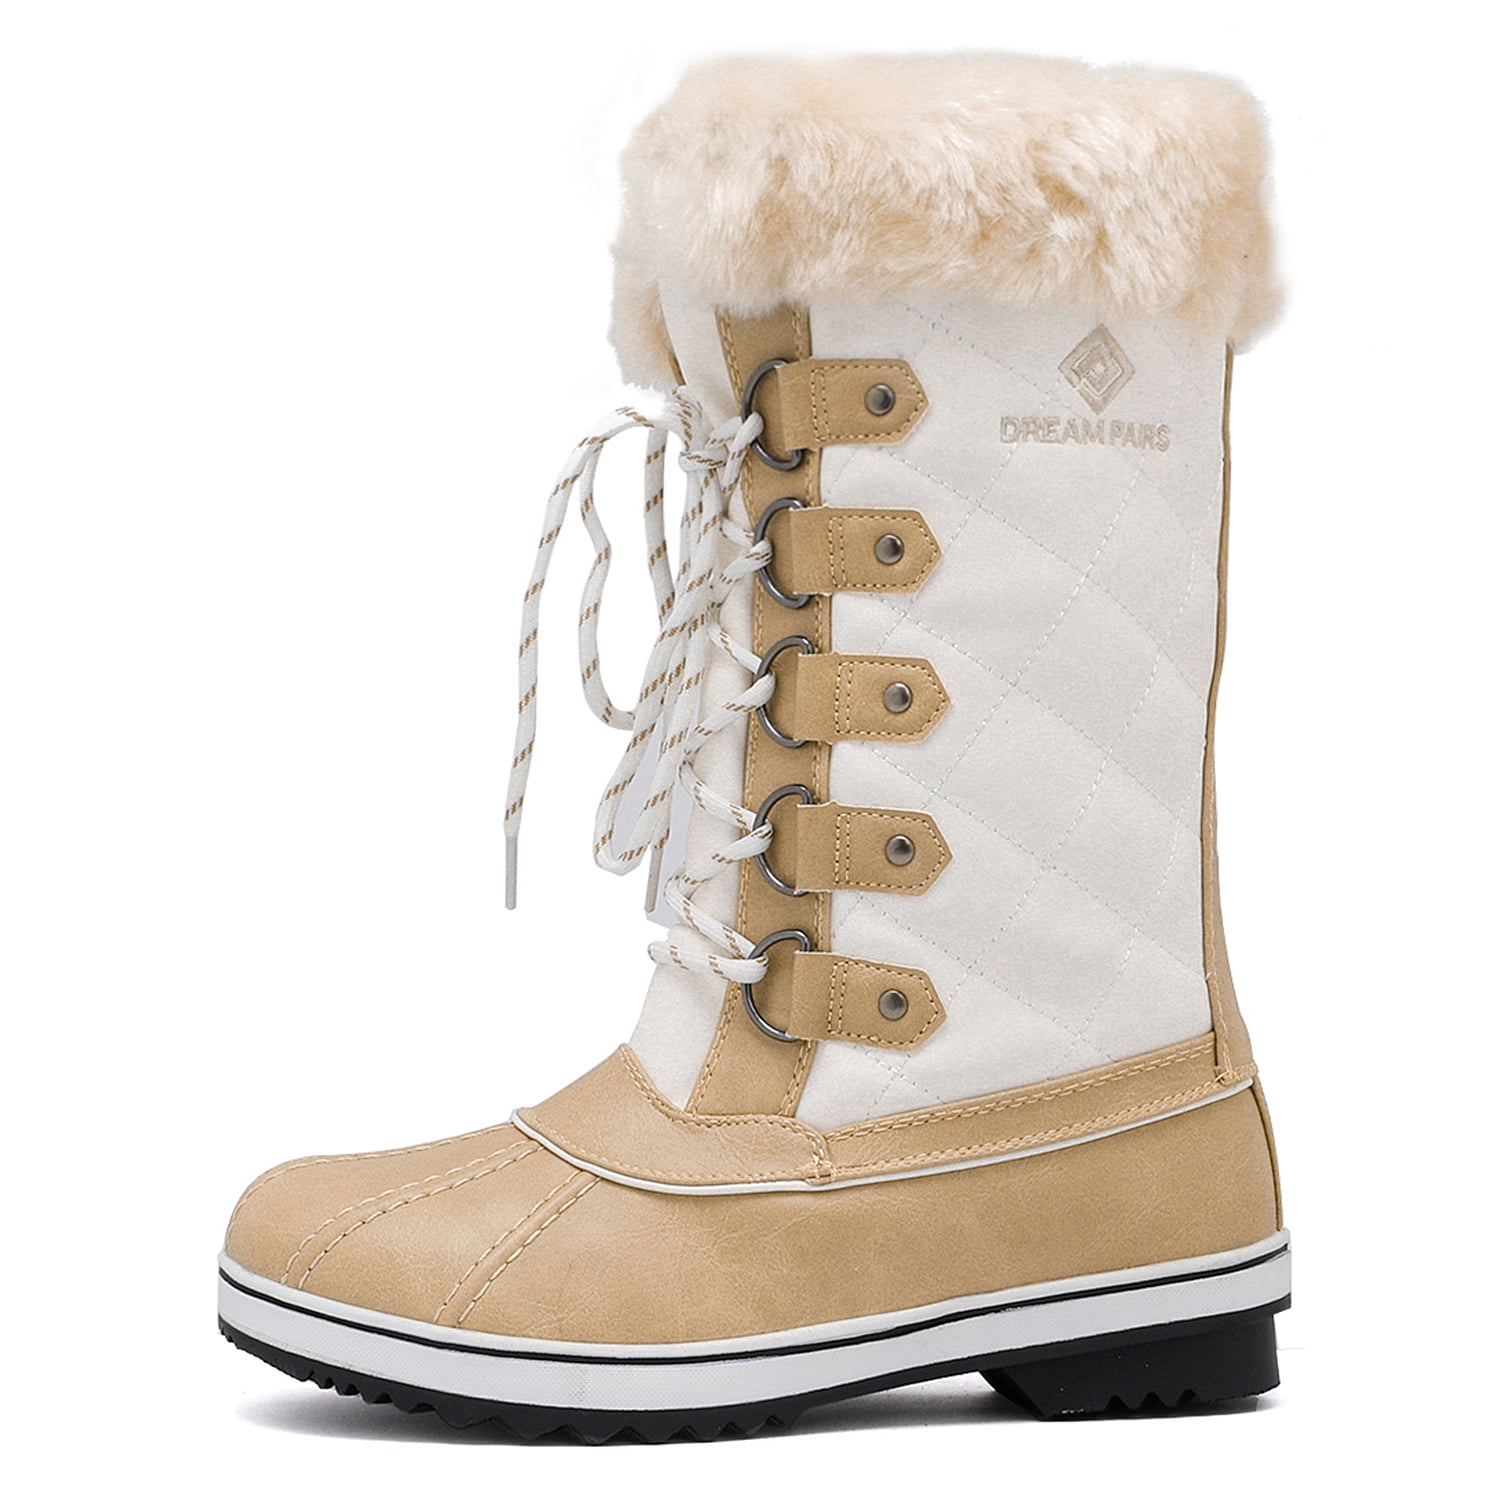 Mid Calf Winter Snow Boots Size 